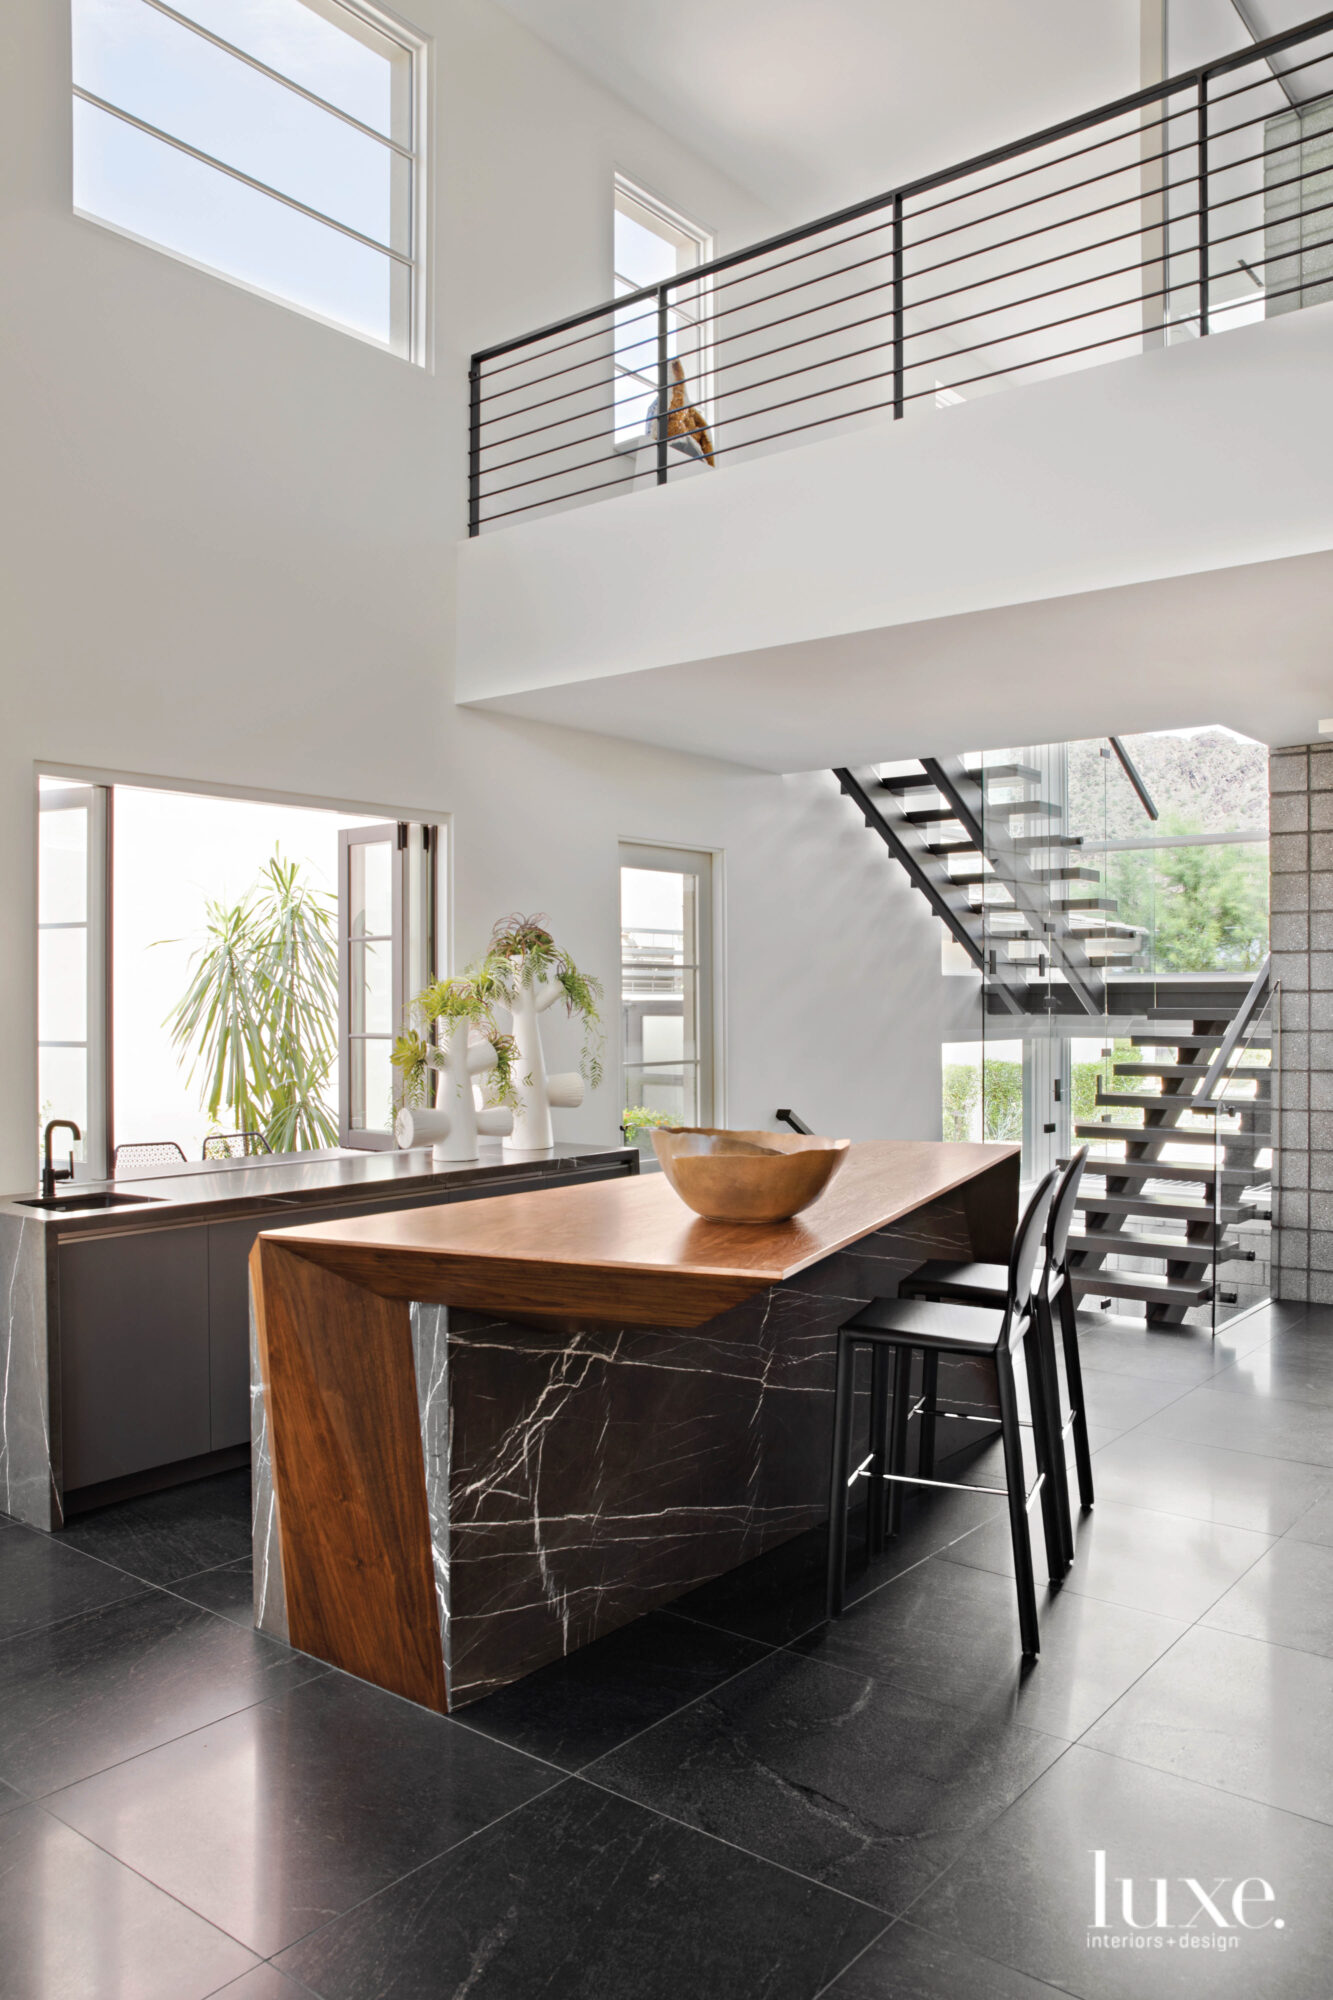 A wood-and-black-marble island in the kitchen with a floating staircase in the background.